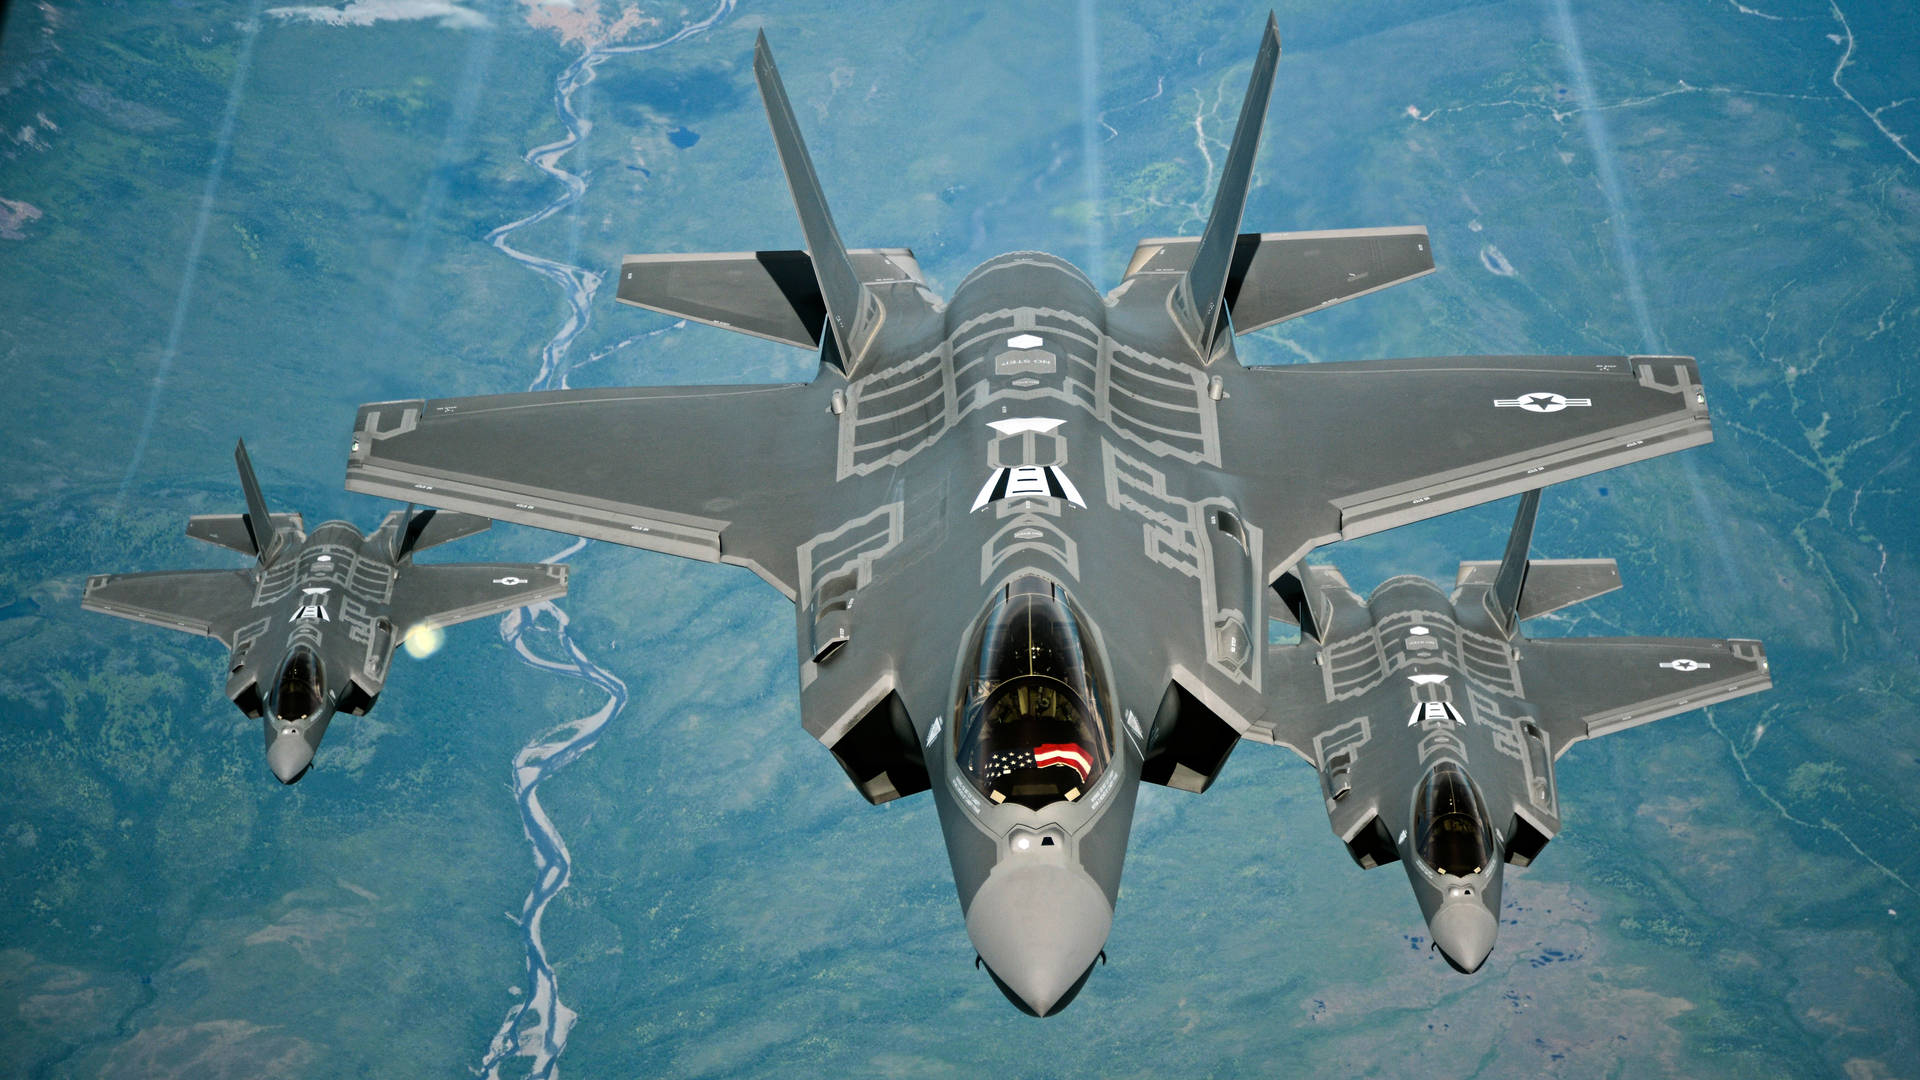 The F-35a Jet Fighter